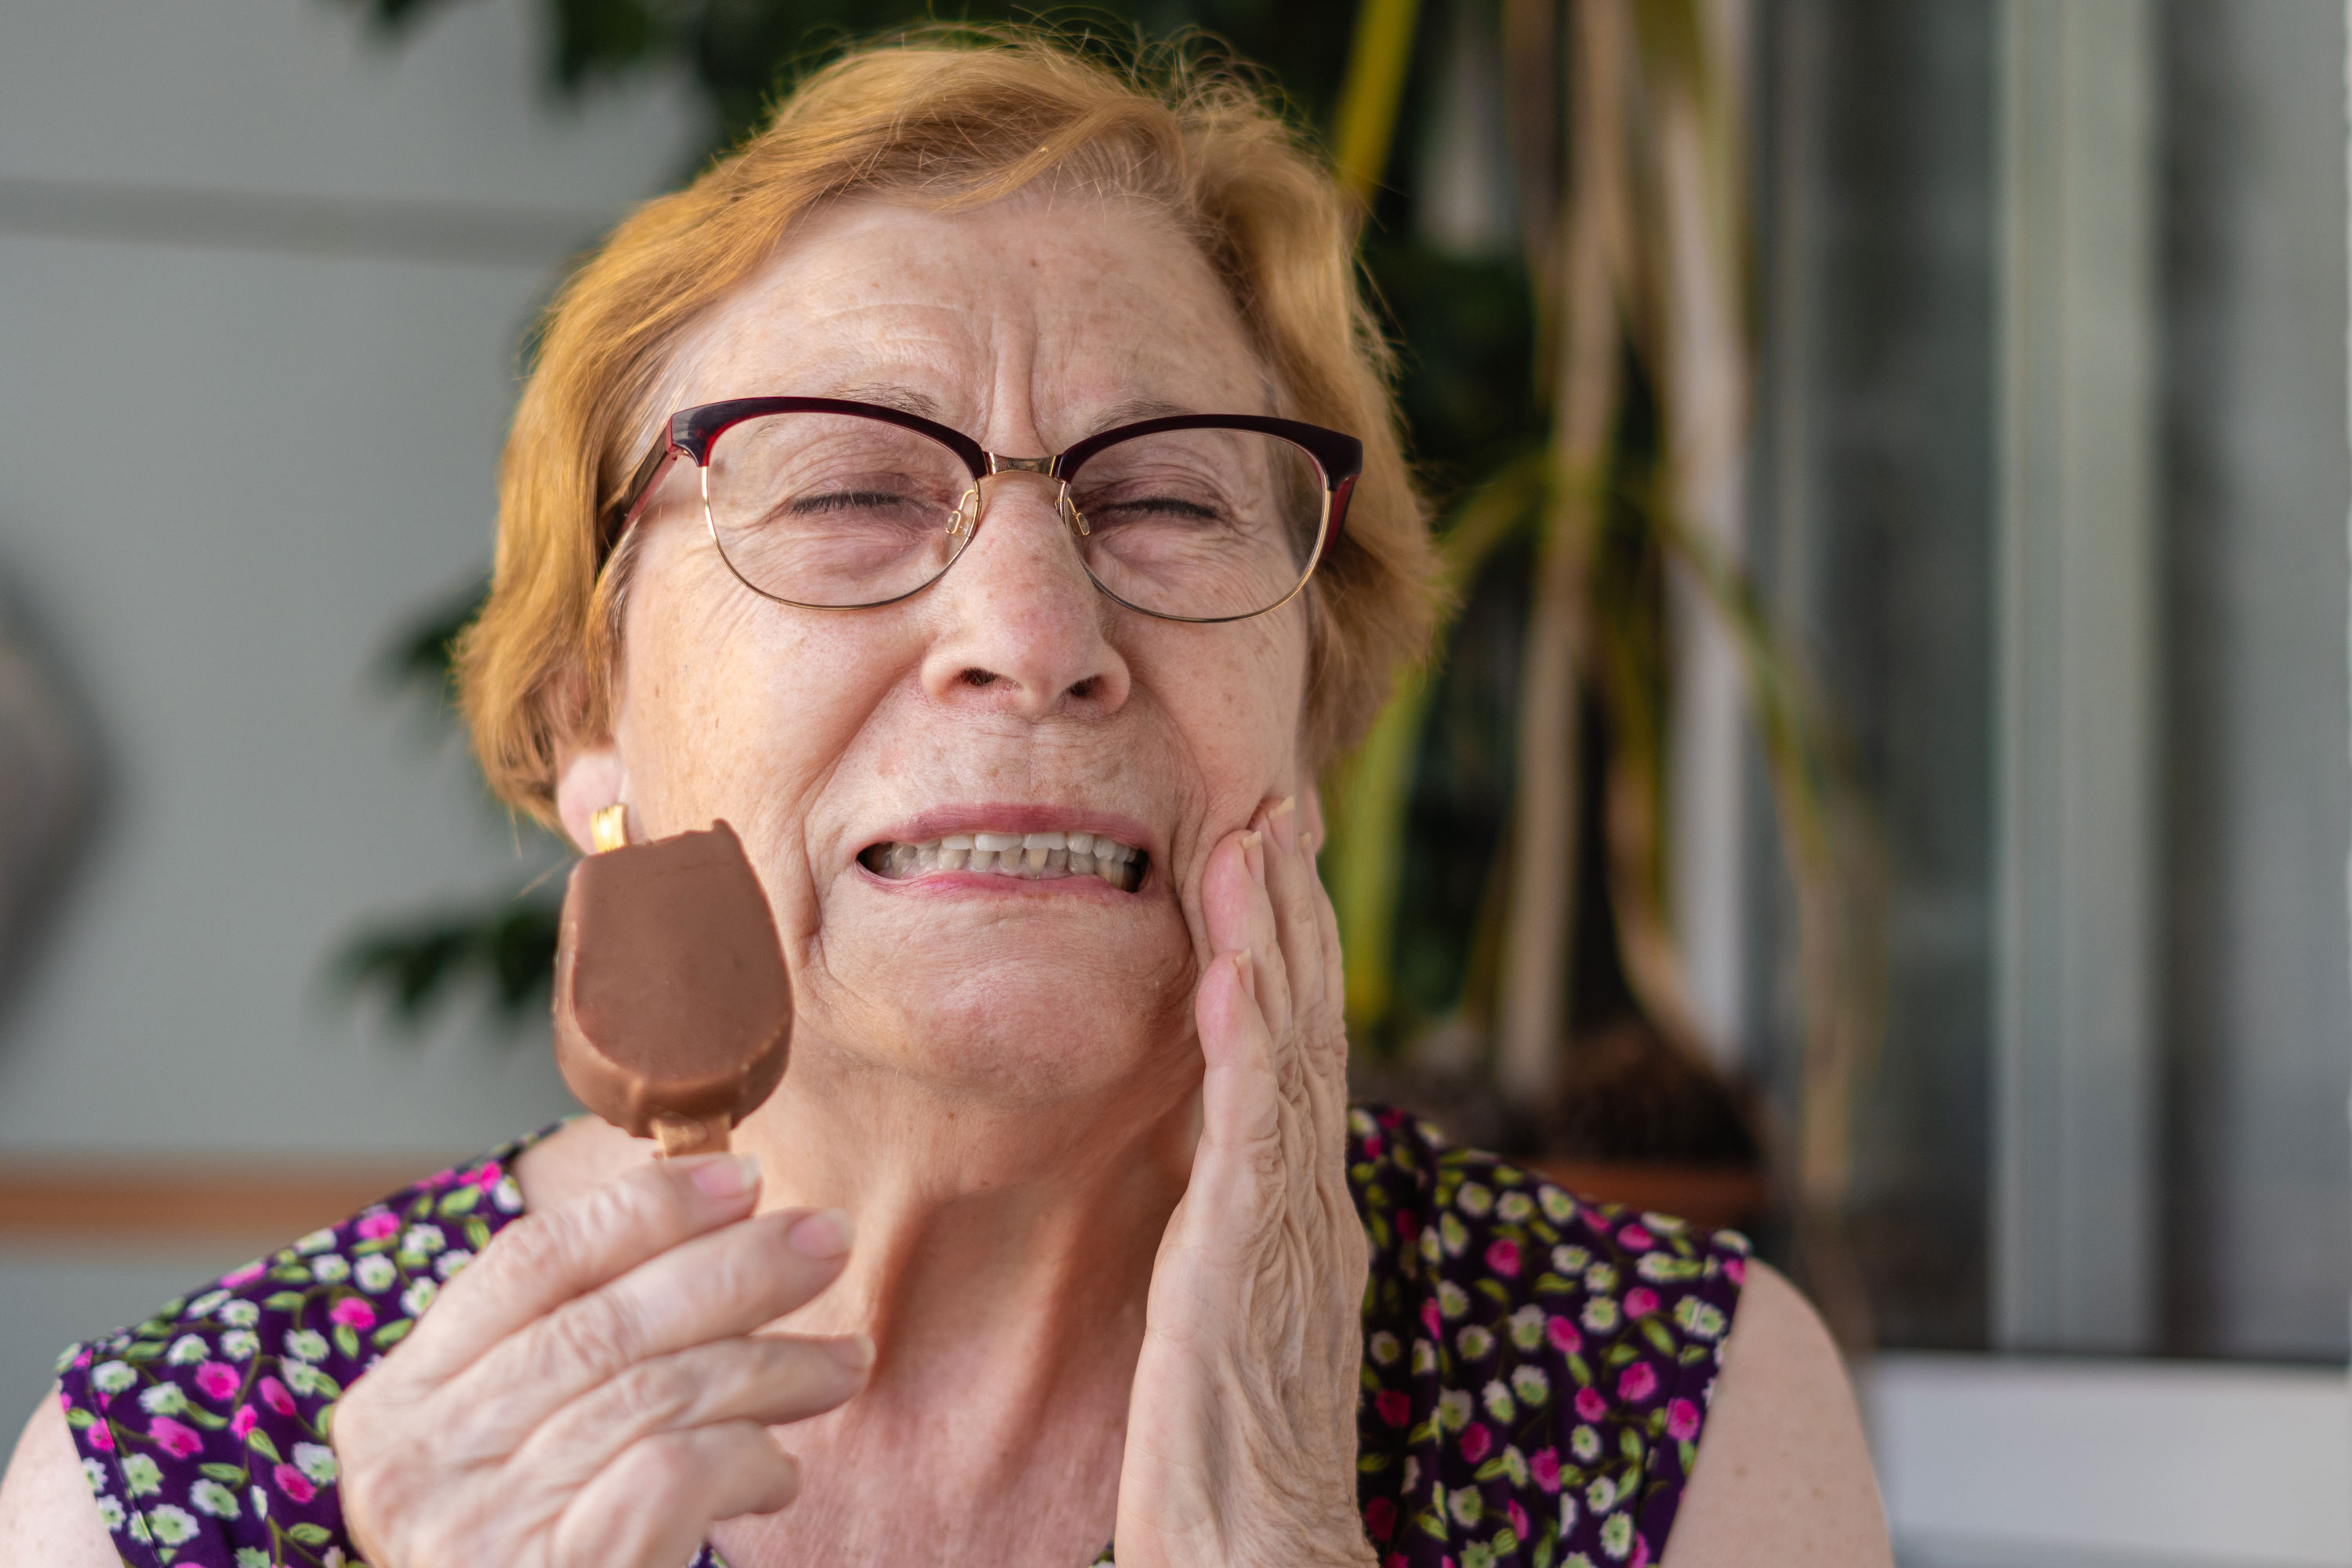 Older woman with a sore tooth while eating an ice cream bar